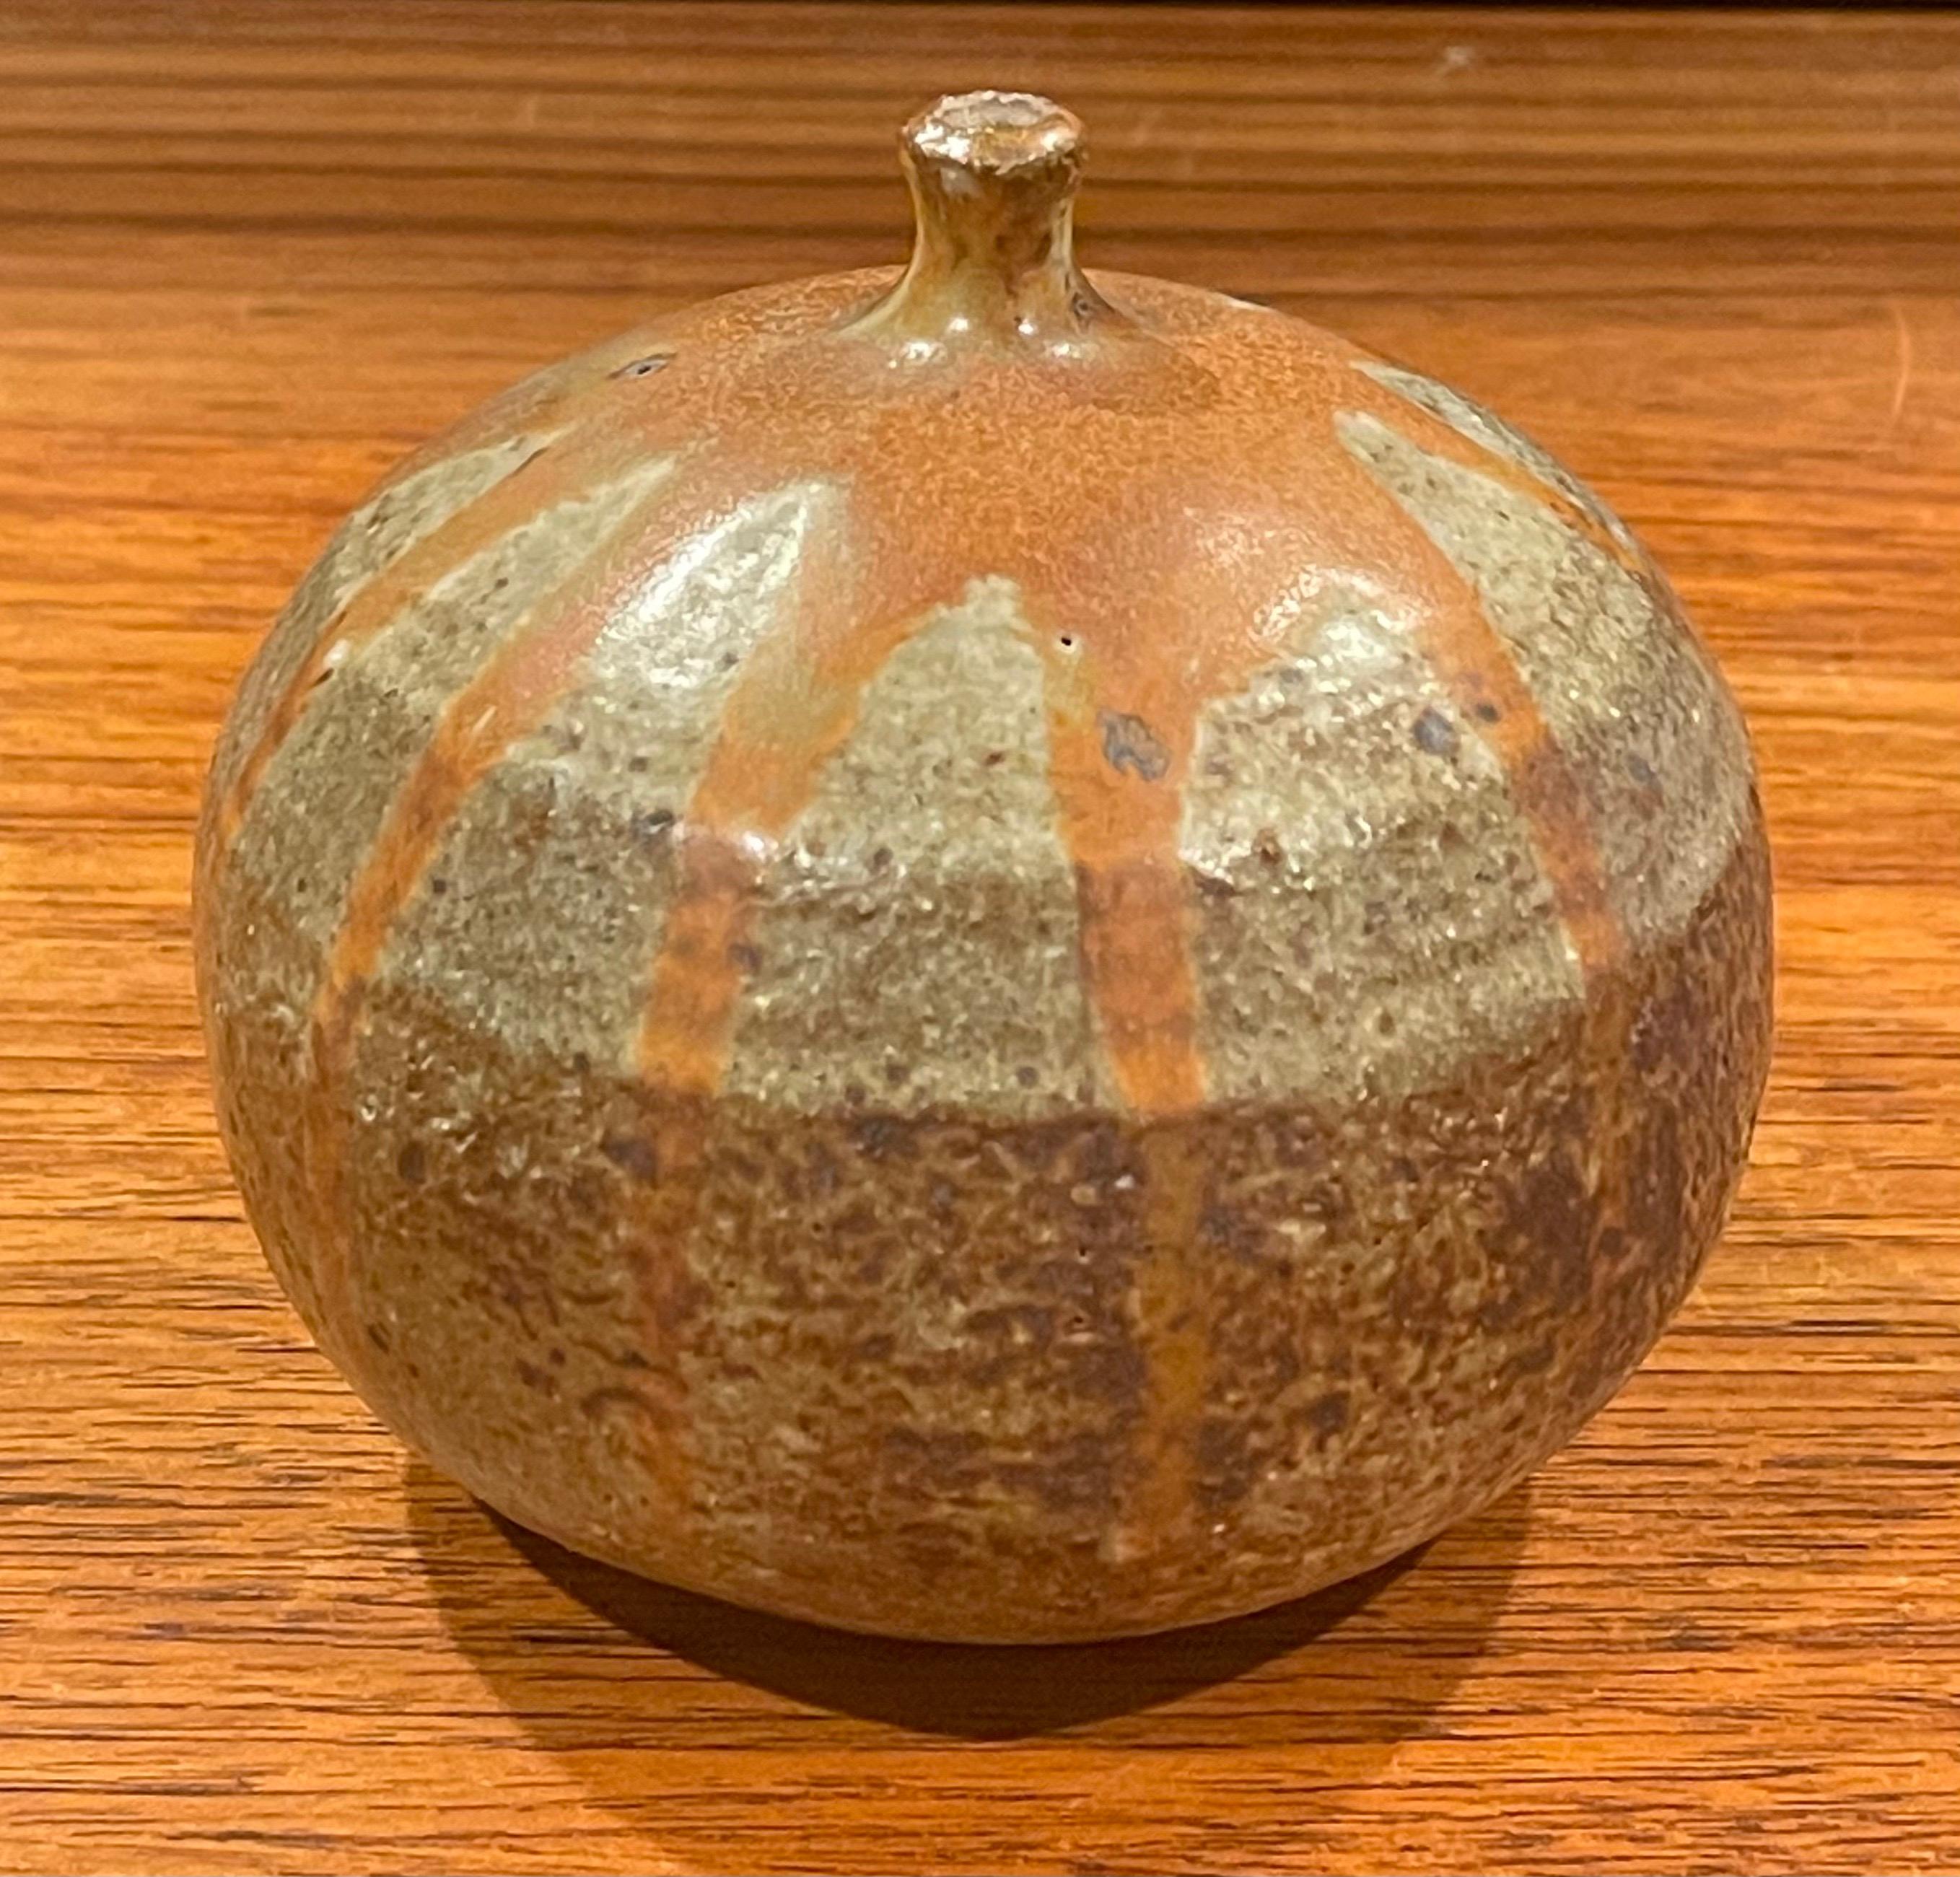 MCM round earthenware signed bud vase, circa 1970s. This vase is in excellent used condition with no chips or cracks and measures 4.5